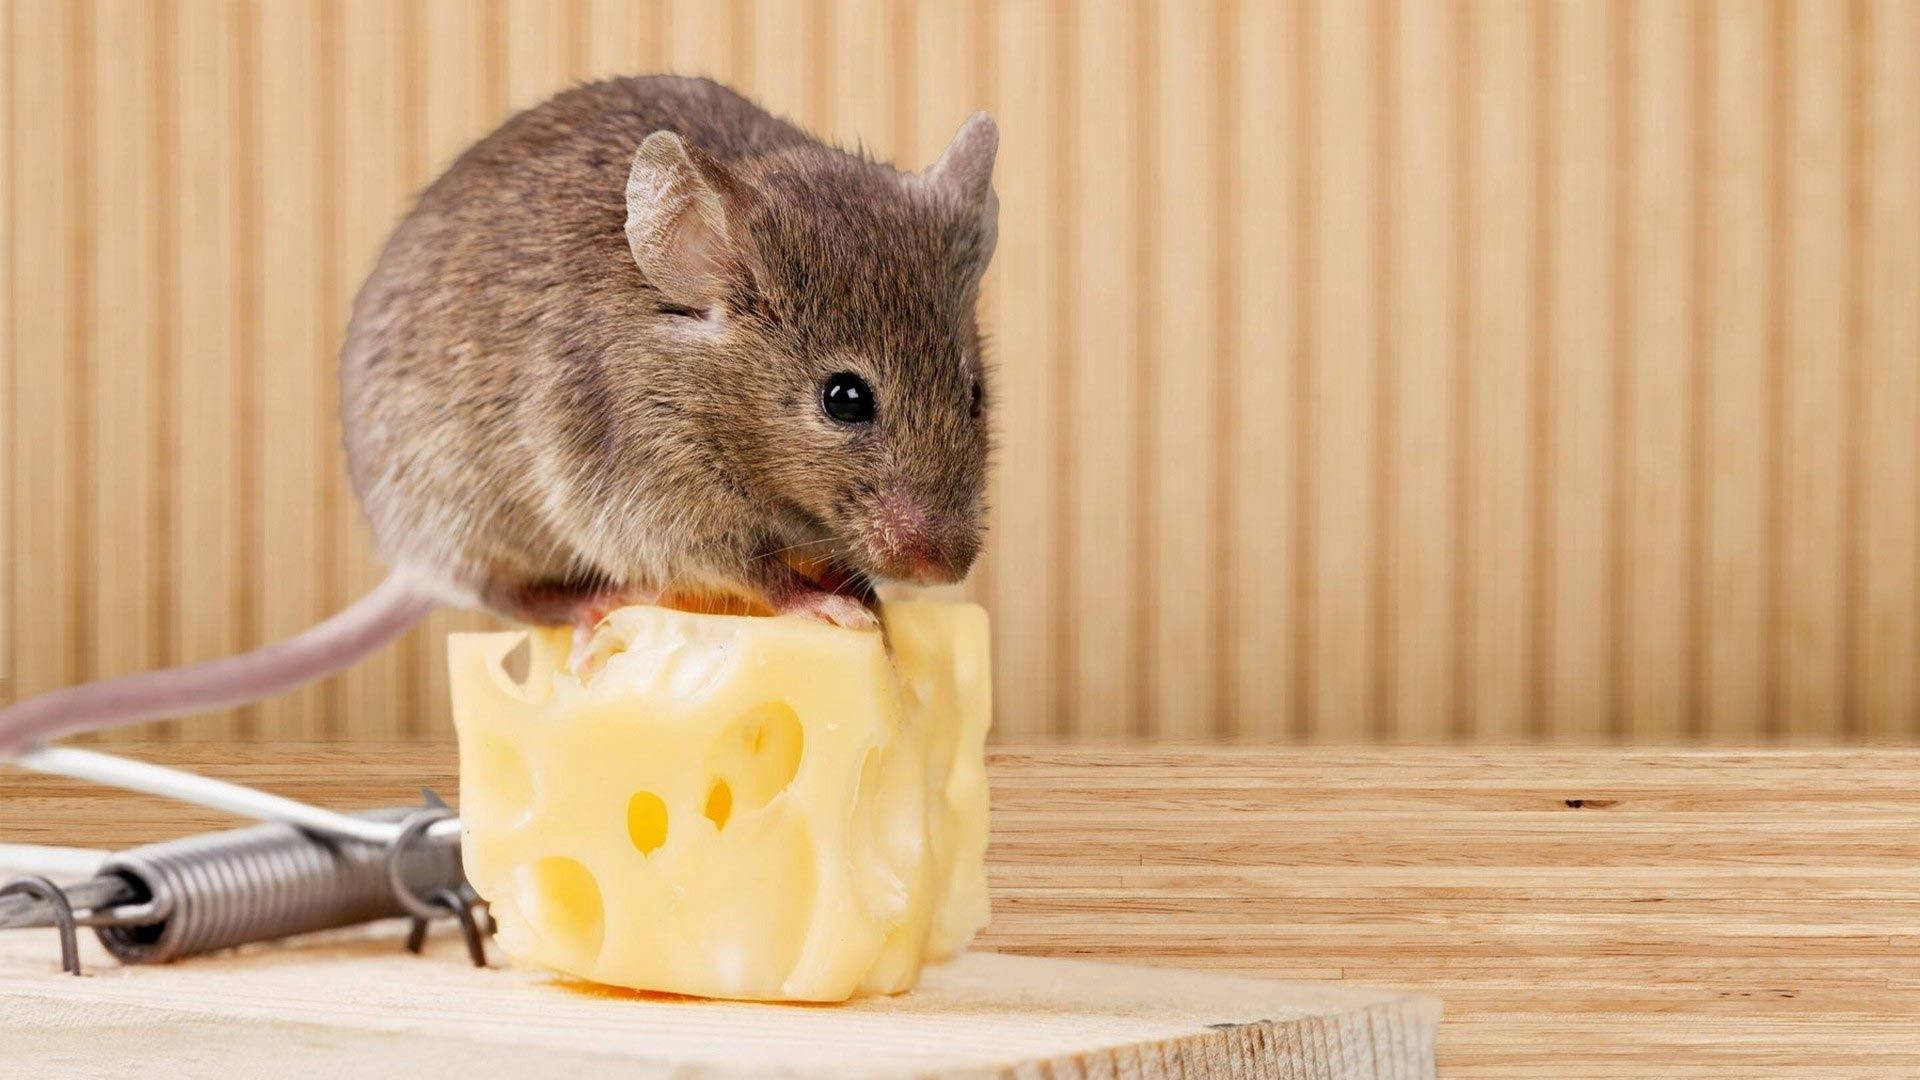 Baby Animal Mouse On Cheese Wallpaper